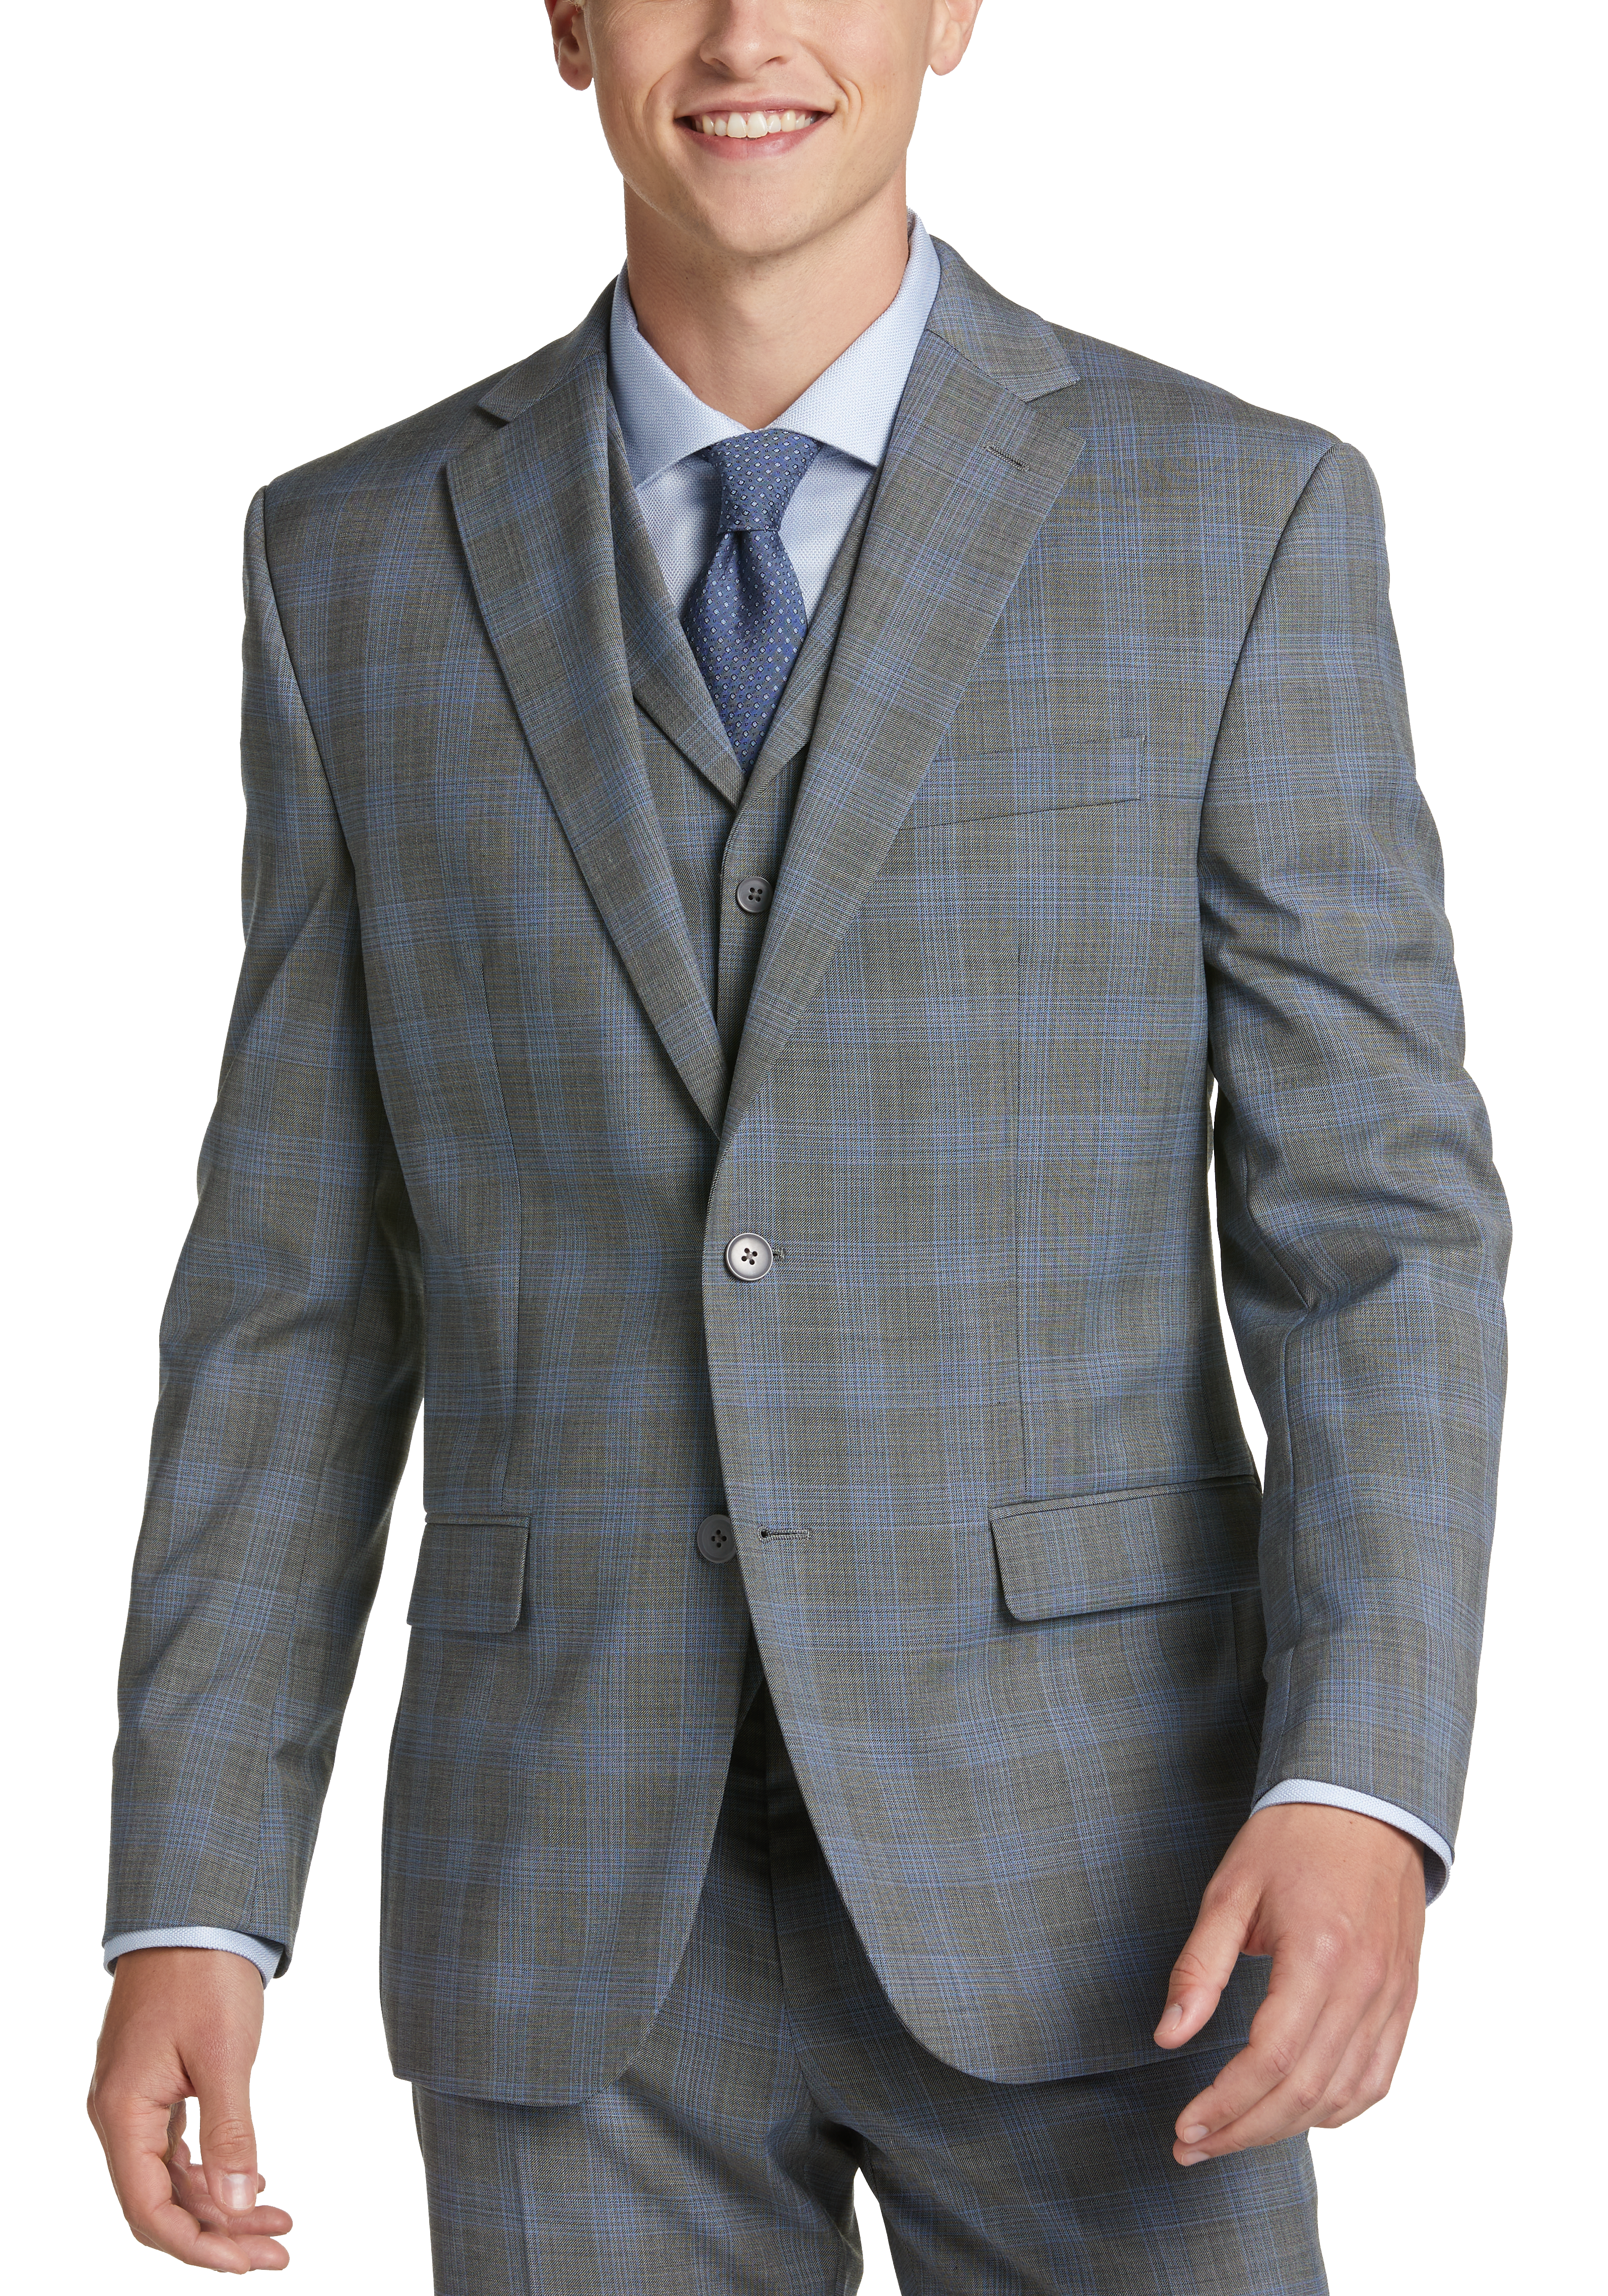 Michael Strahan Classic Fit Vested Suit Gray And Blue Plaid Mens Sale Mens Wearhouse 